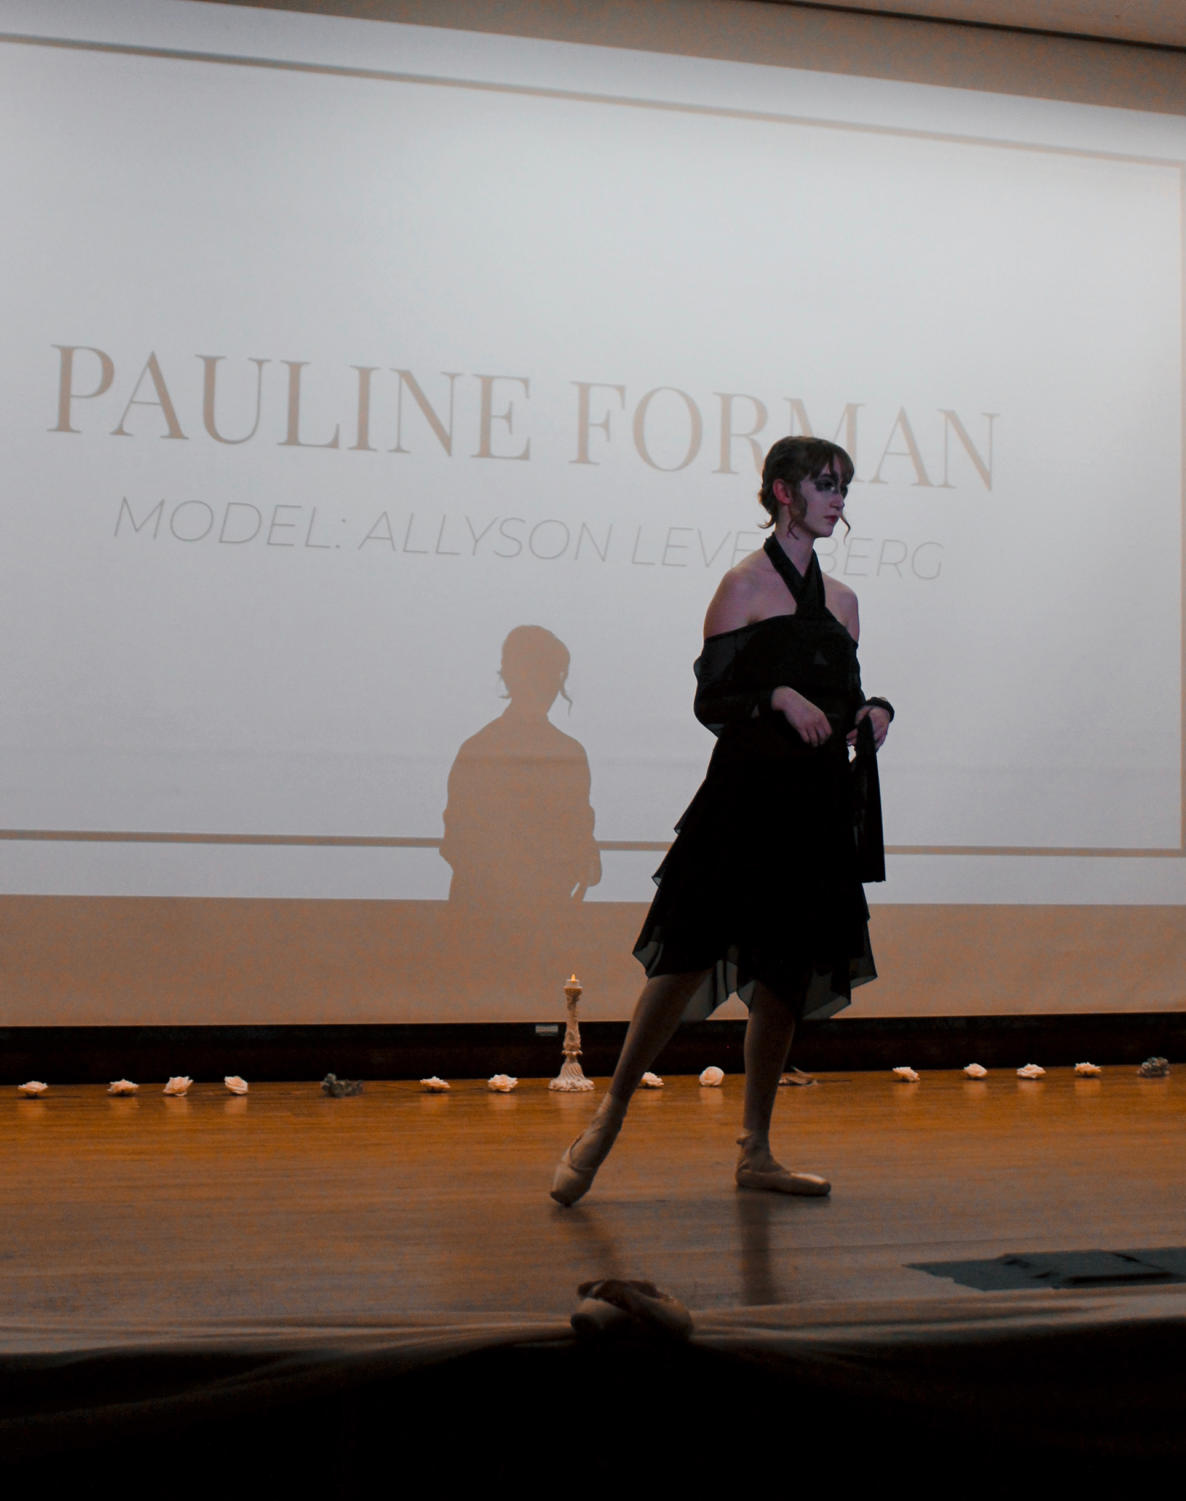 fso+brings+ballet-core+to+its+annual+fashion+show